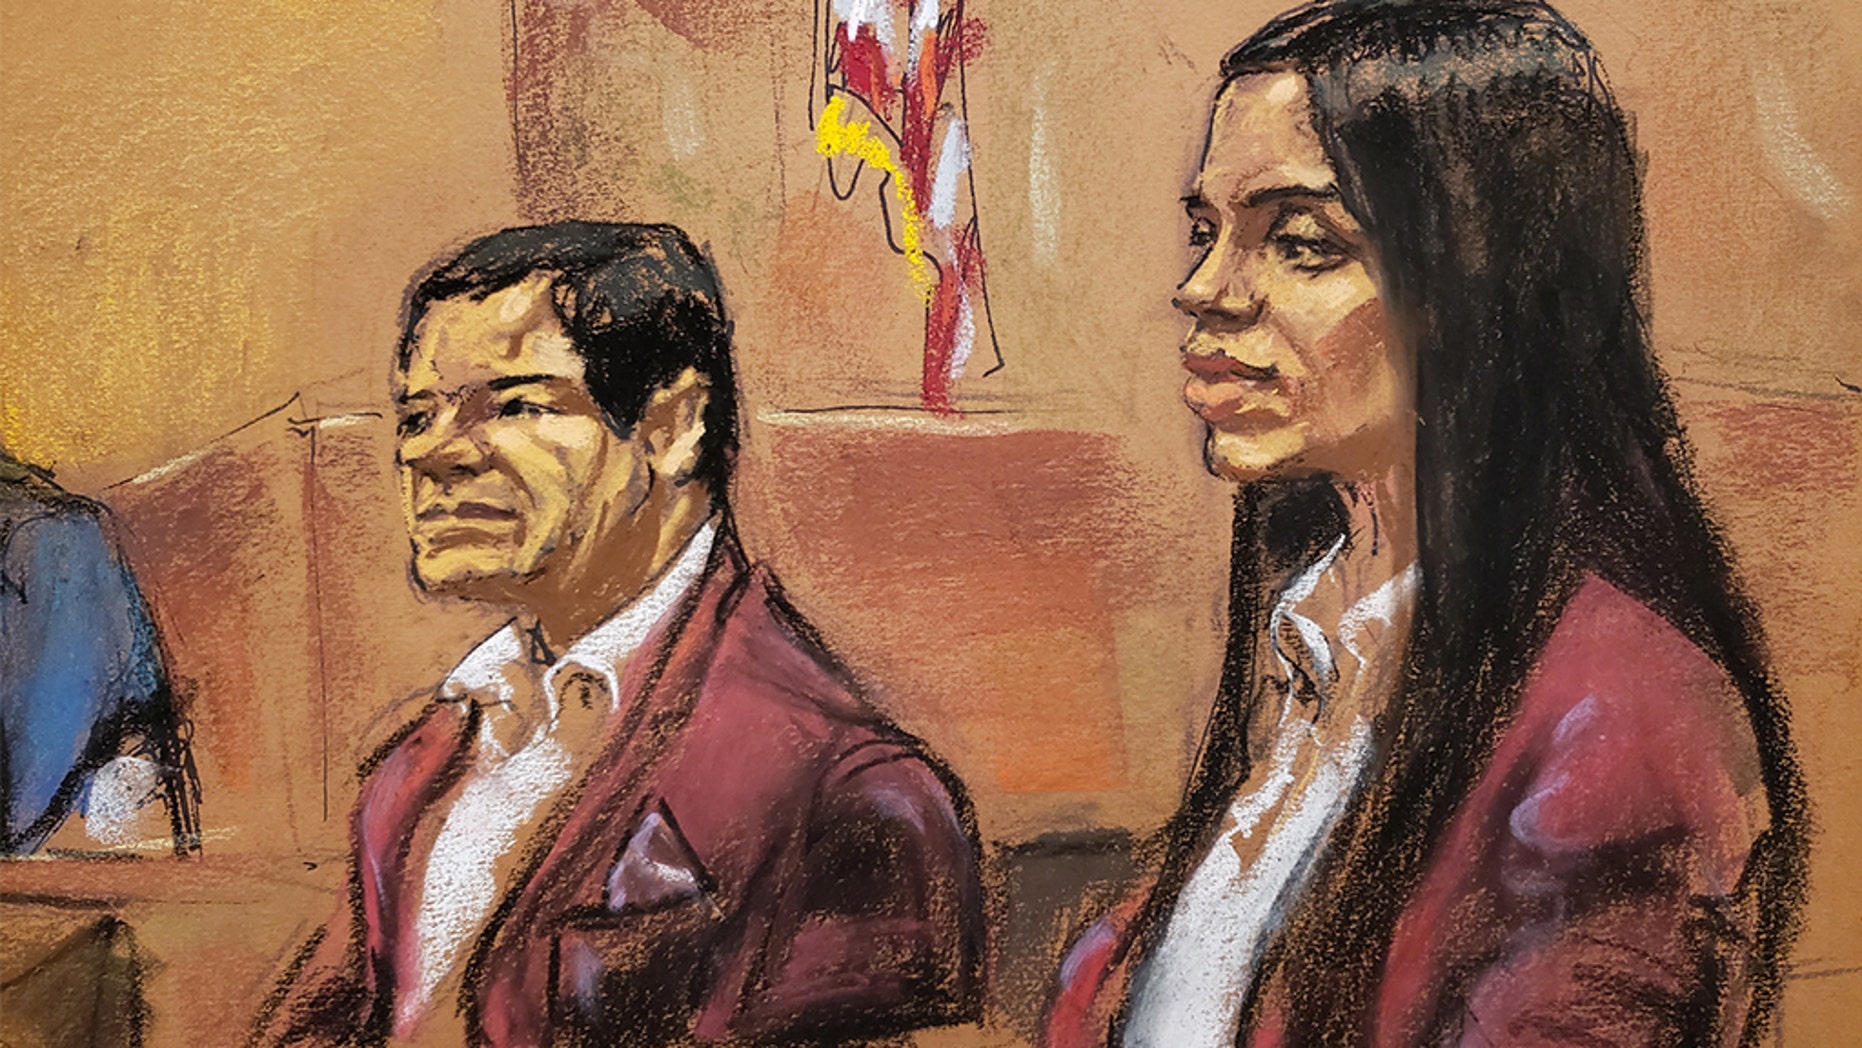 El Chapo, wife wear matching outfits - in apparent troll of mistress